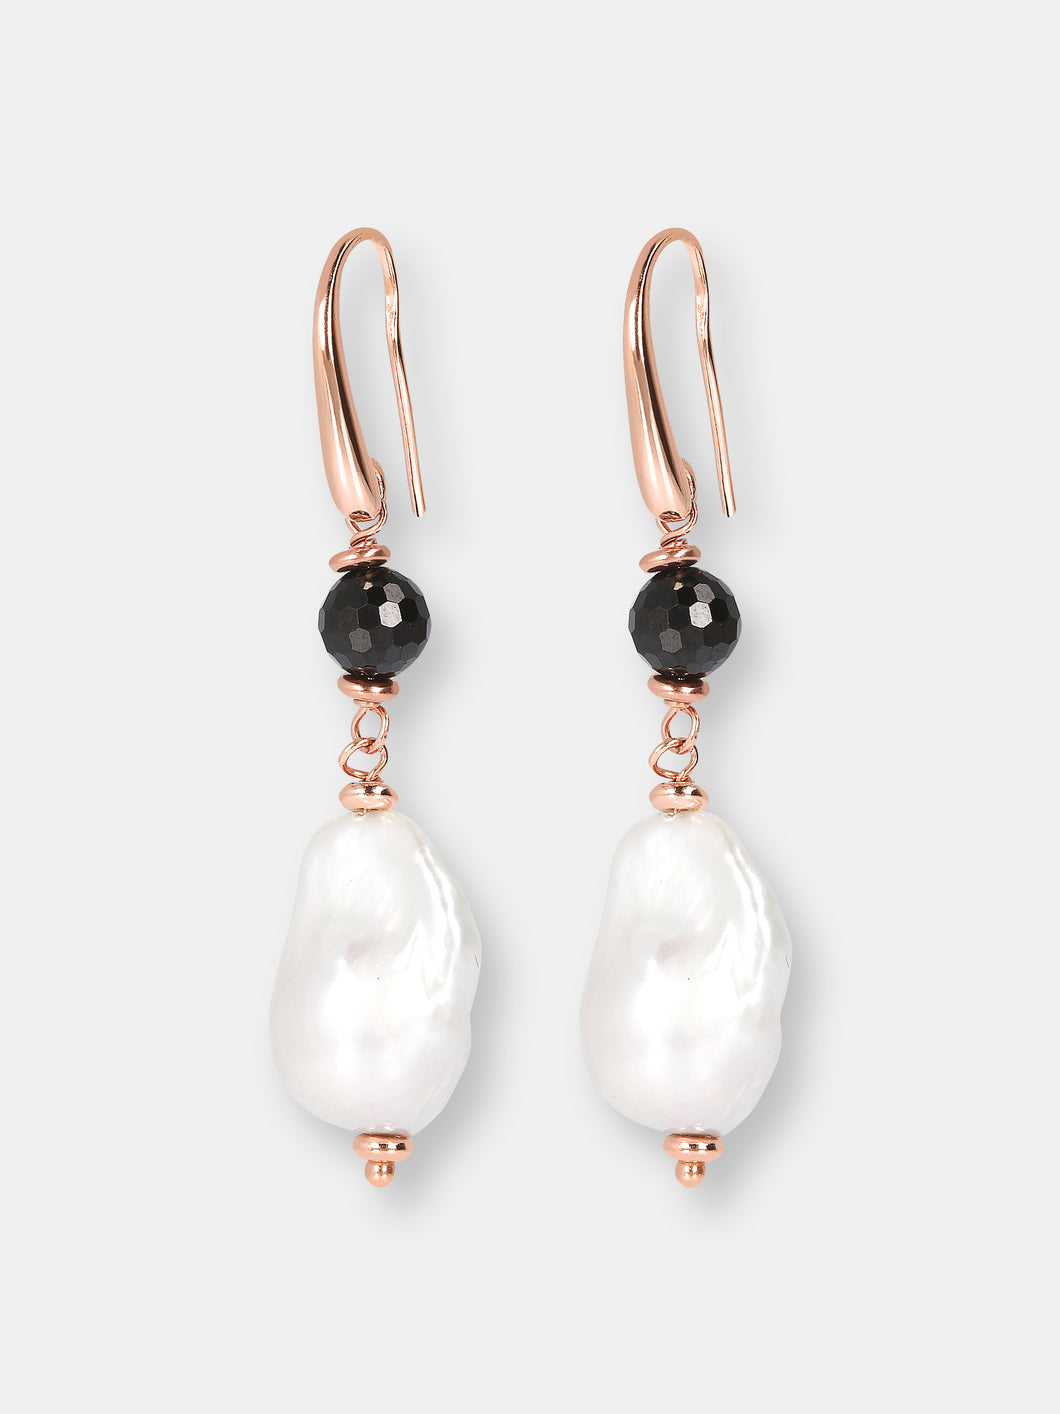 Baroque Pearl and Black Spinel Drop Earrings